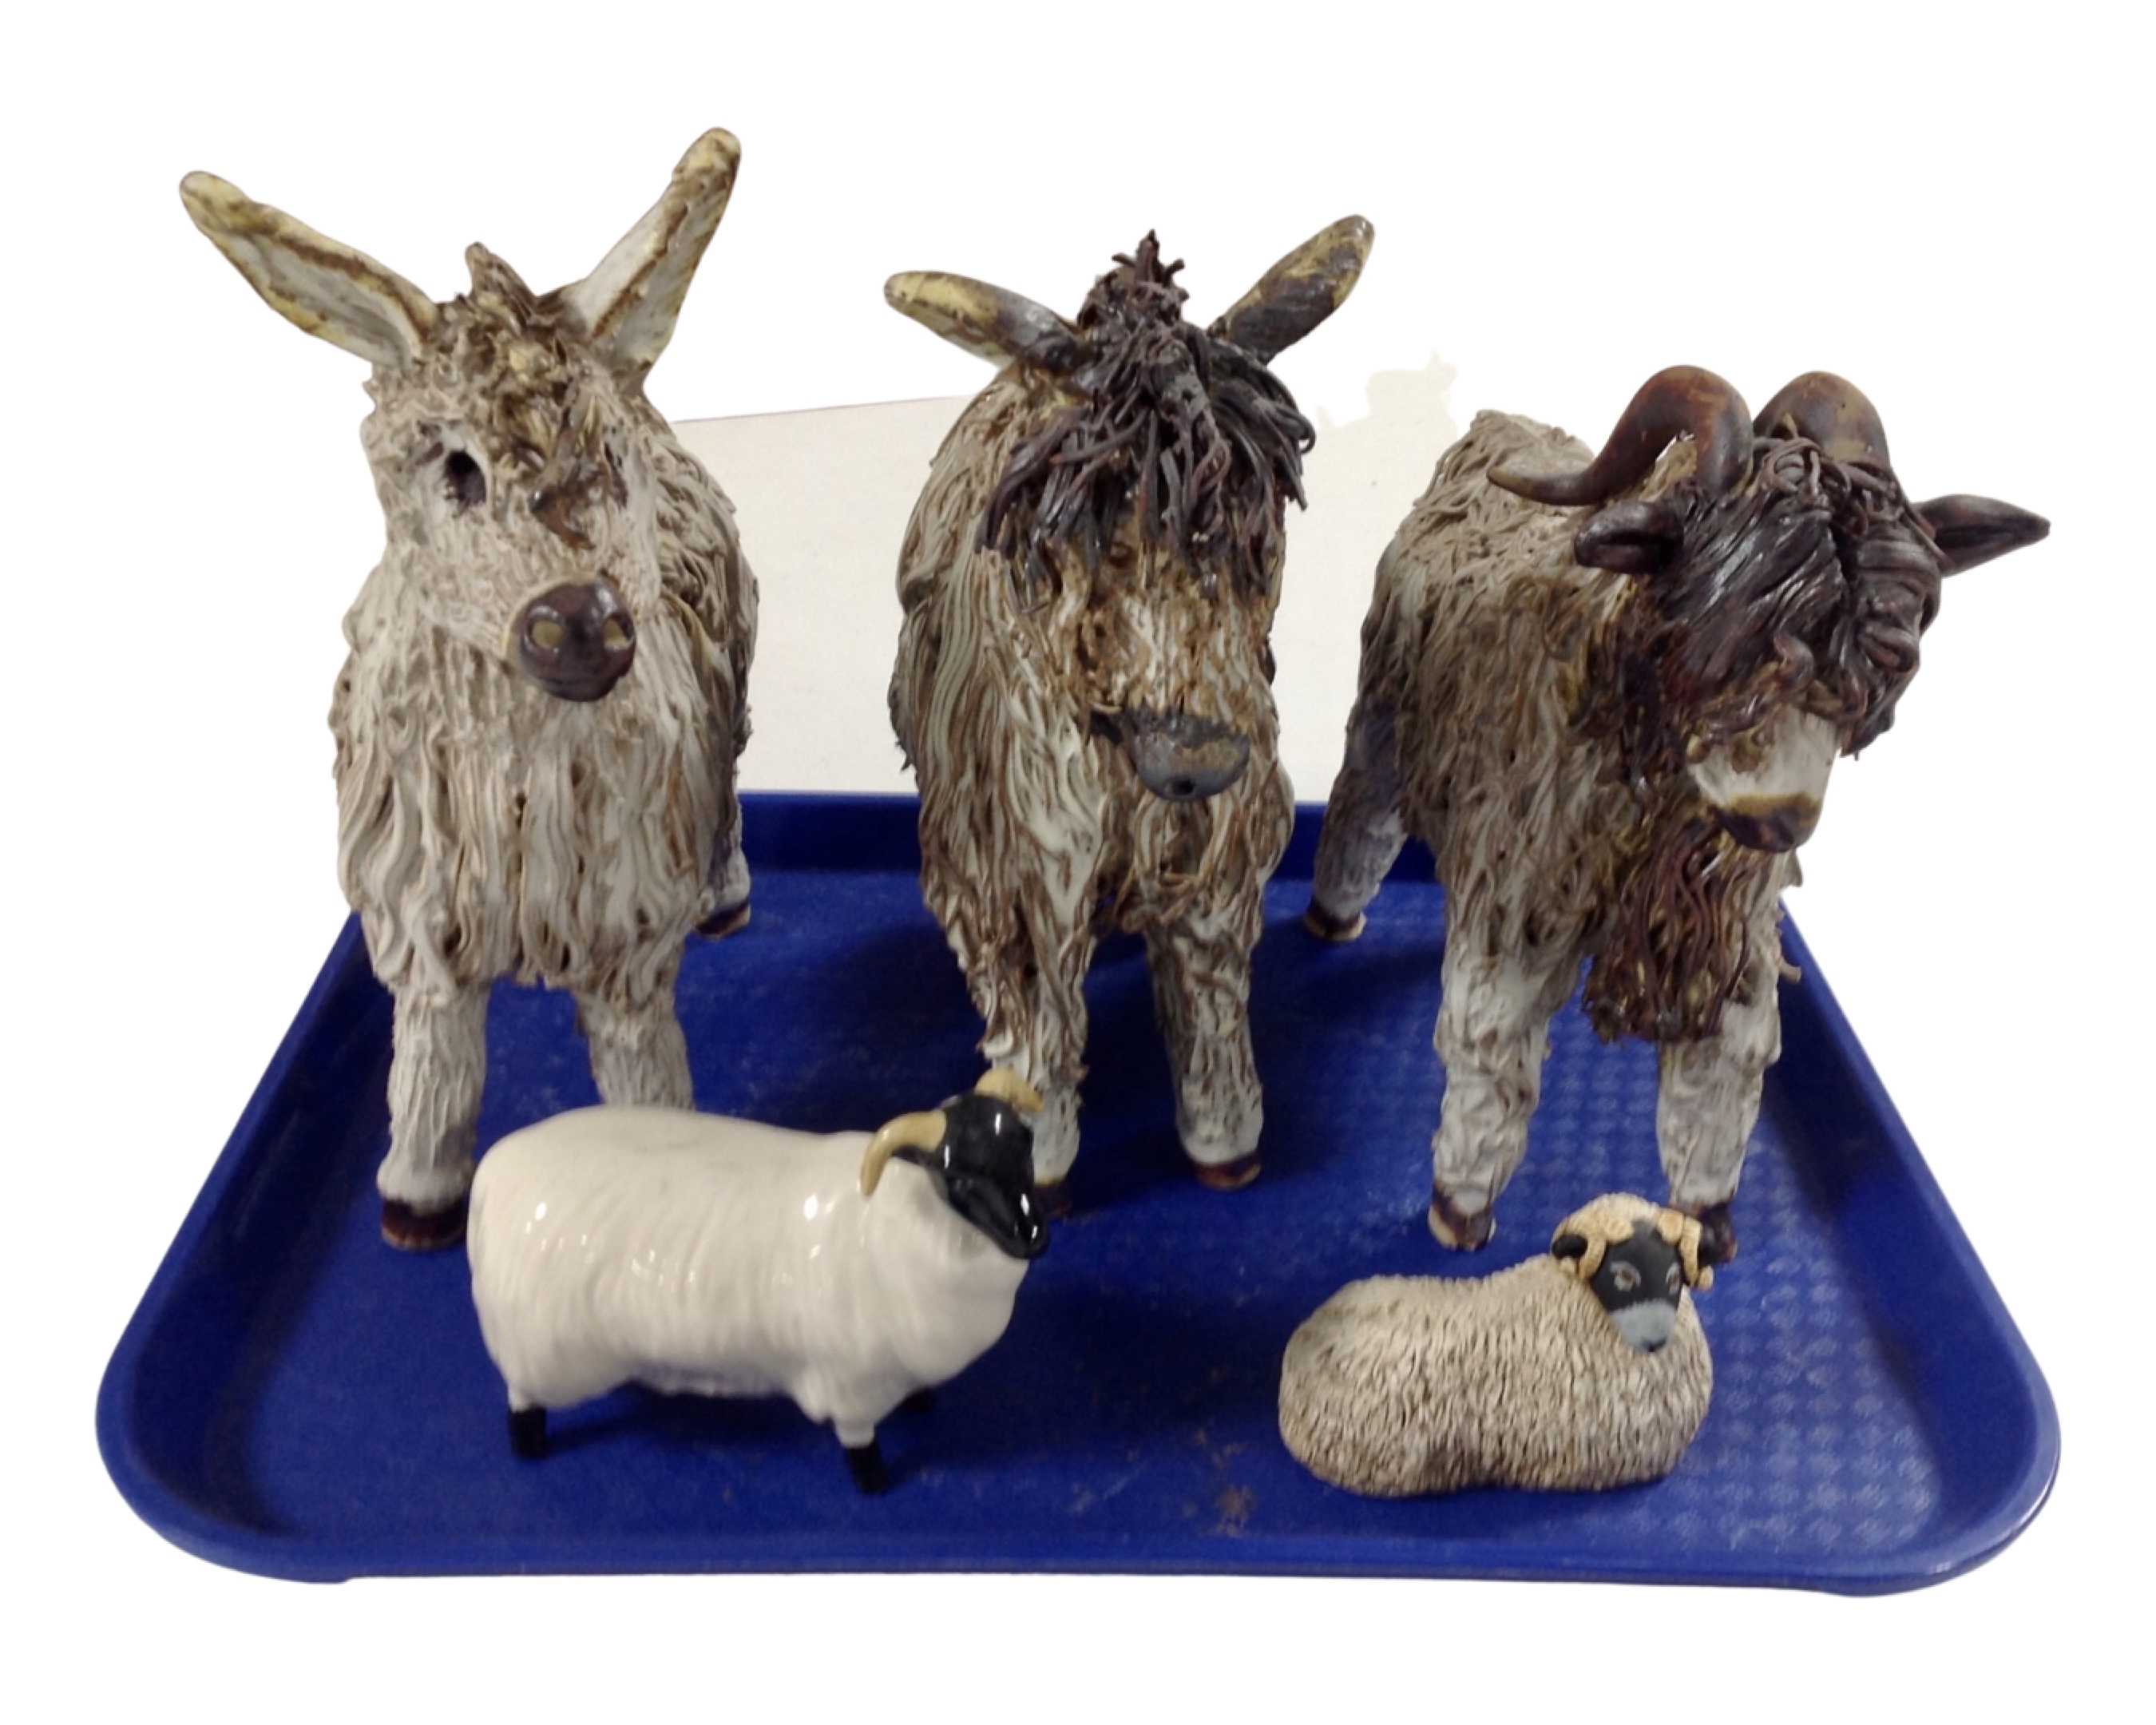 A tray containing a Beswick figure of a sheep together with three Veronica Ballan pottery figures